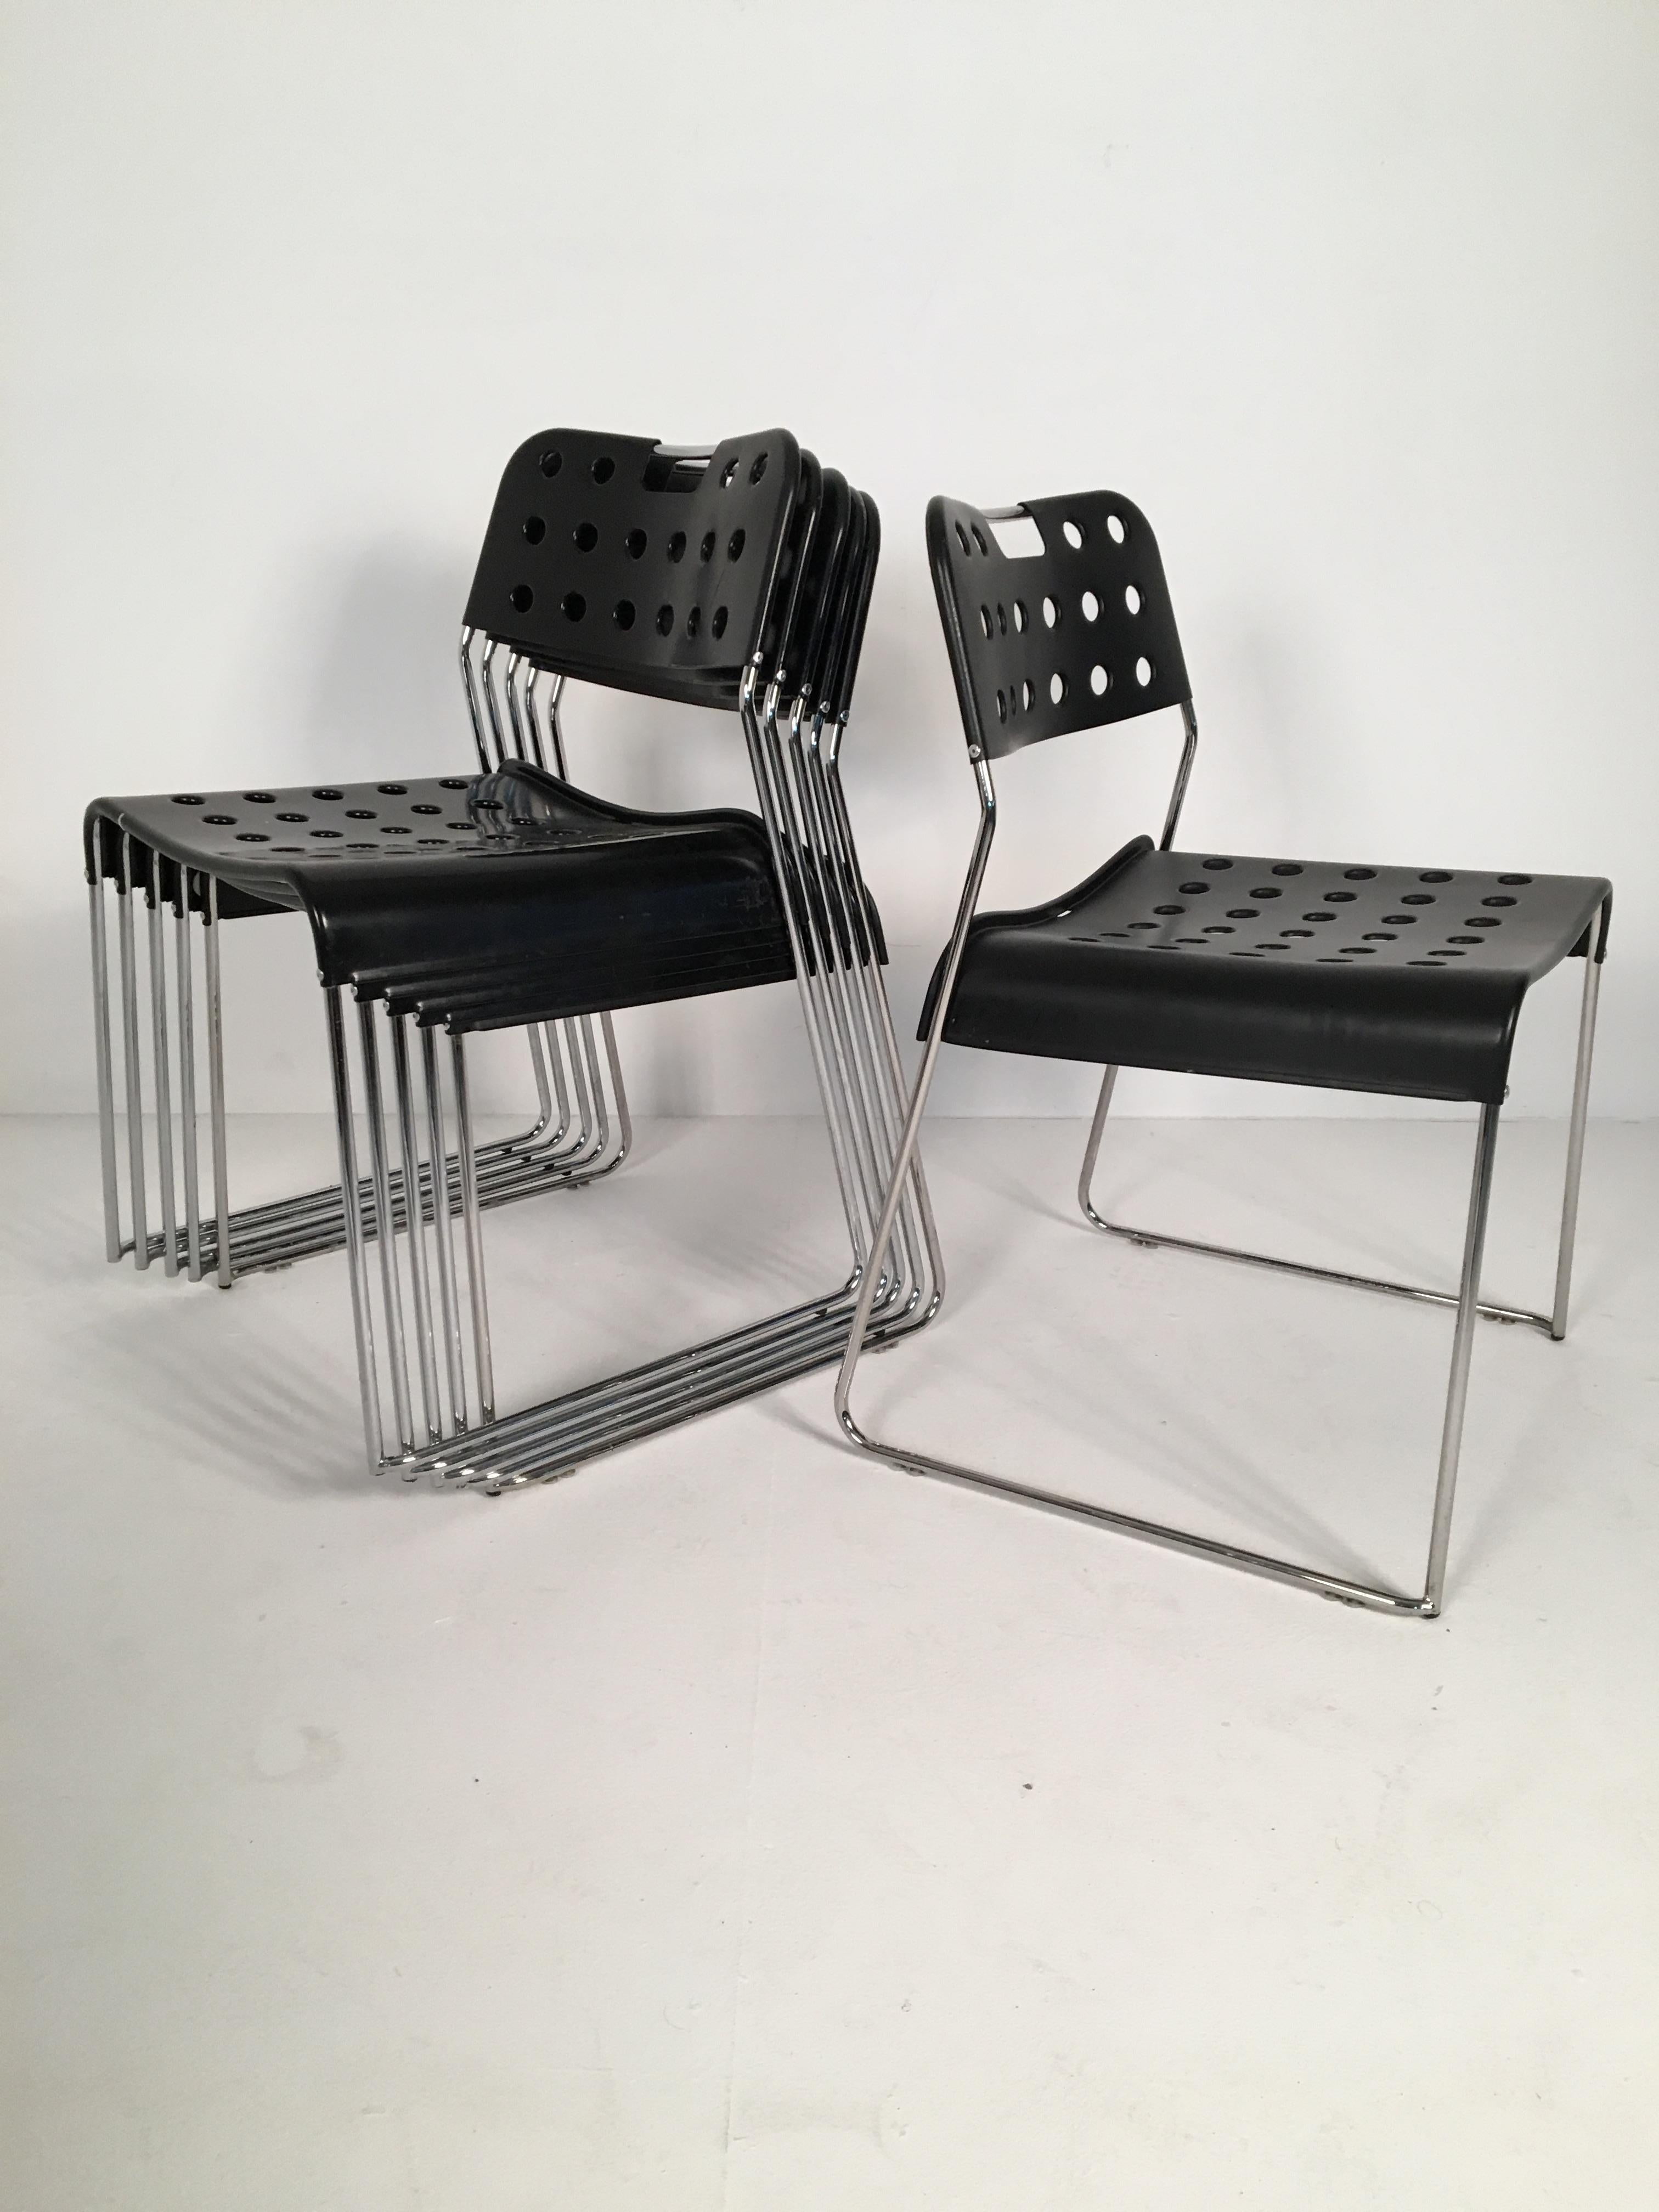 6 superb stackable Omstak chairs, designed by revered British designer Rodney Kinsman and produced by Bieffeplast in the 1970s.

A now very collectible design, these chairs are extremely practical, hard wearing and the perfect fit for Mid-Century